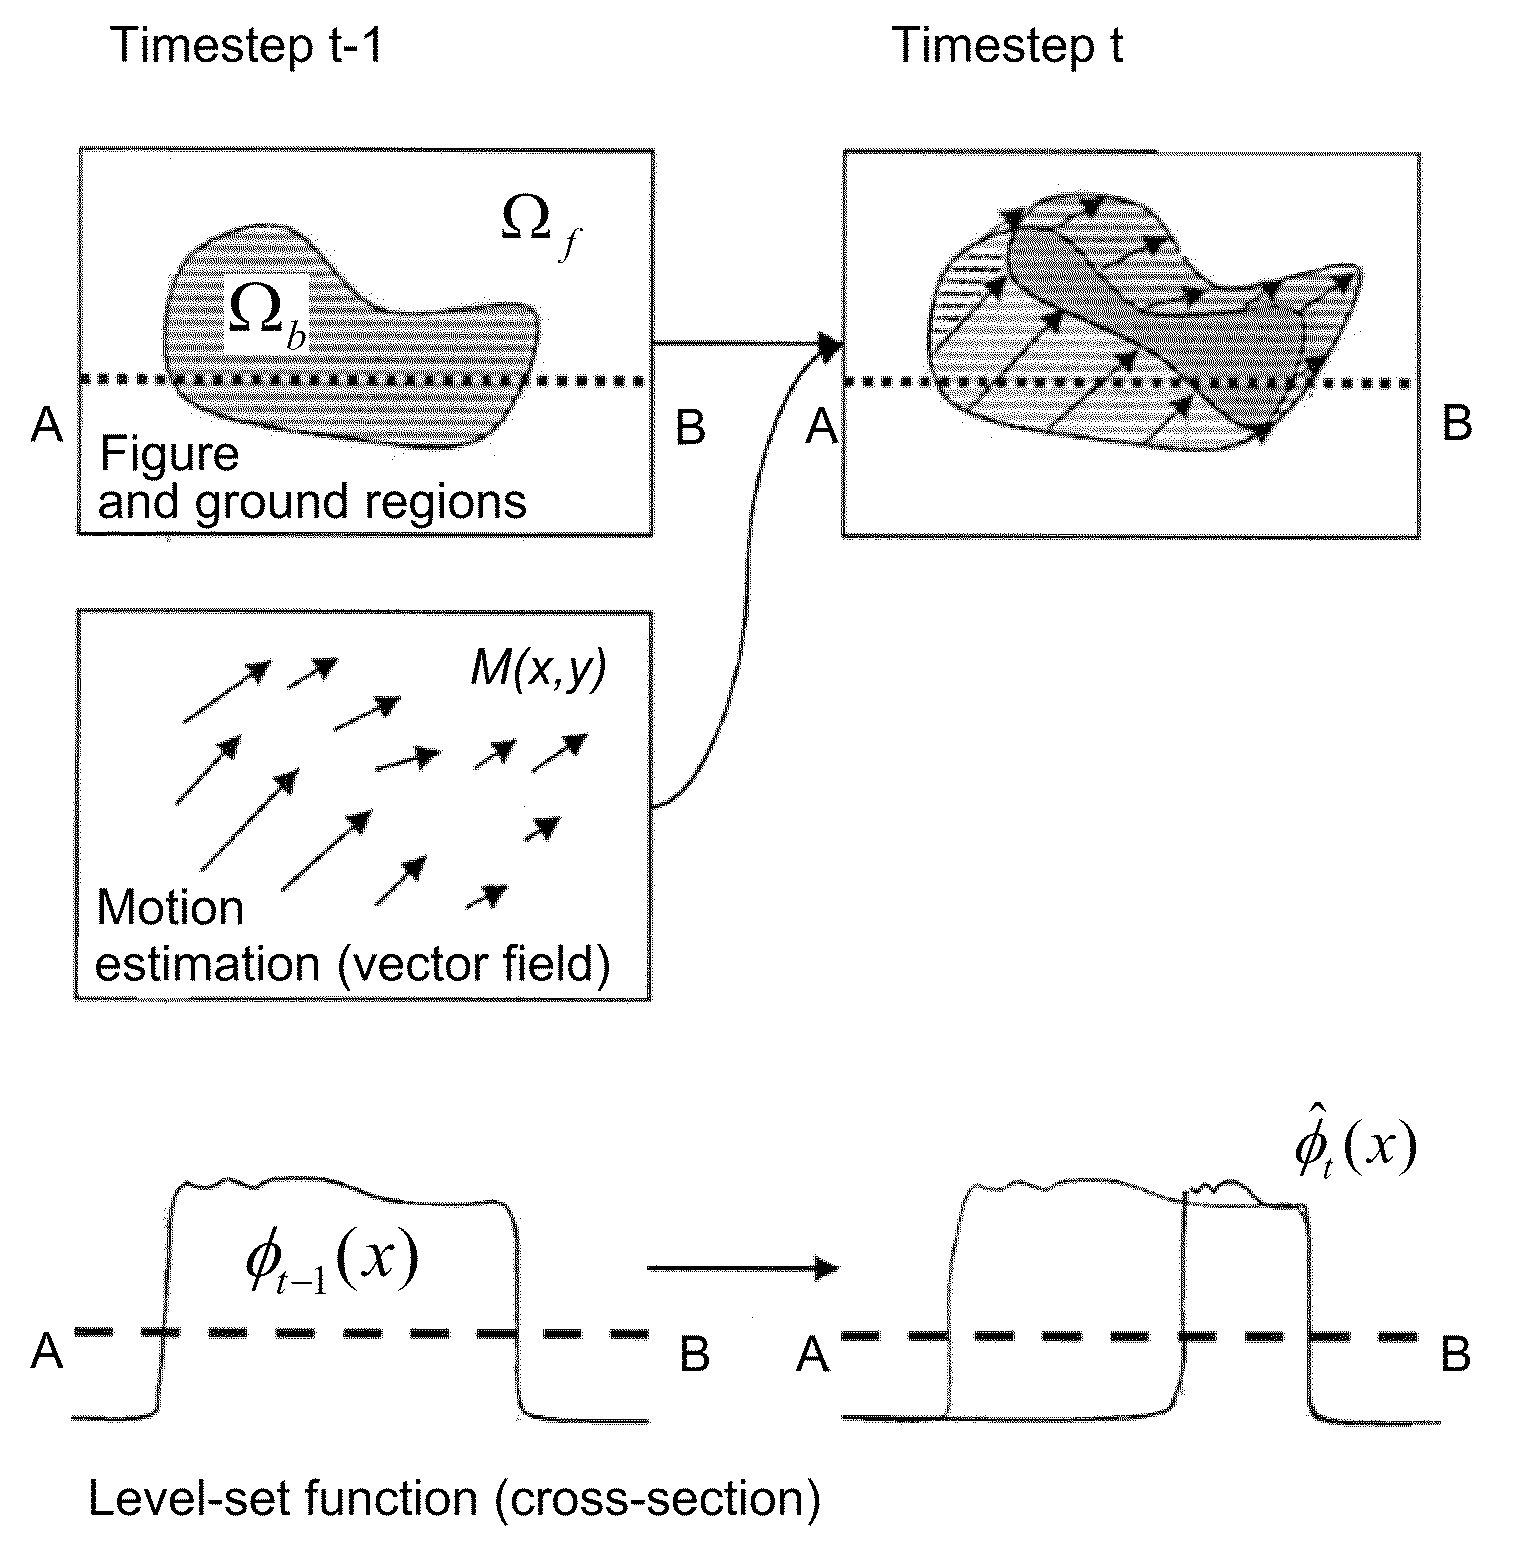 Method And Device For Continuous Figure-Ground Segregation In Images From Dynamic Visual Scenes